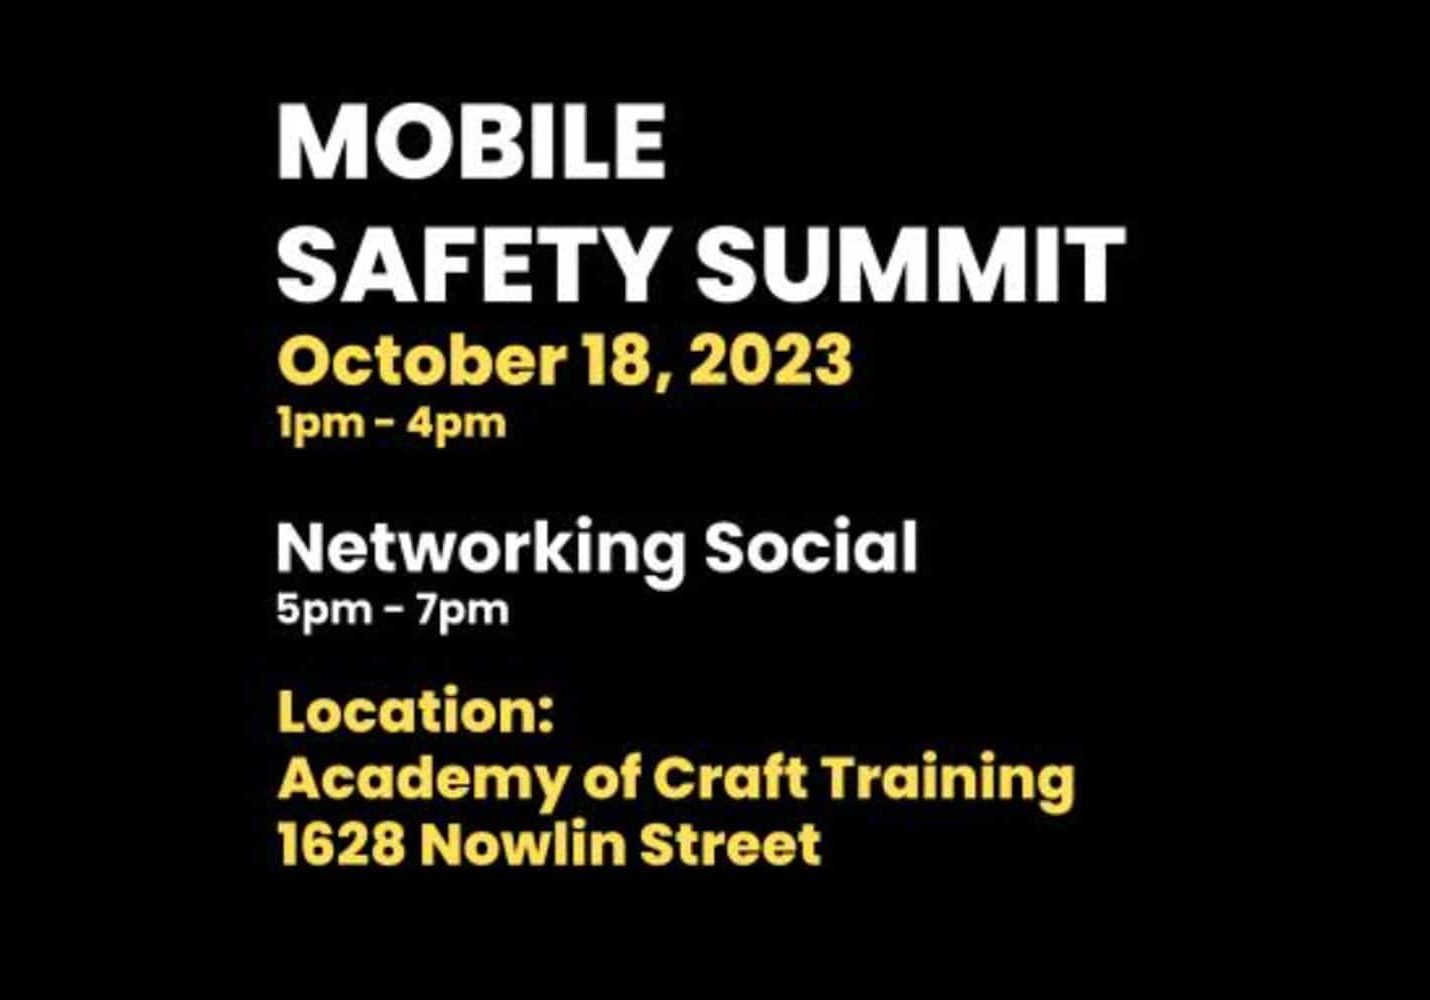 Safety Summit Coming Up